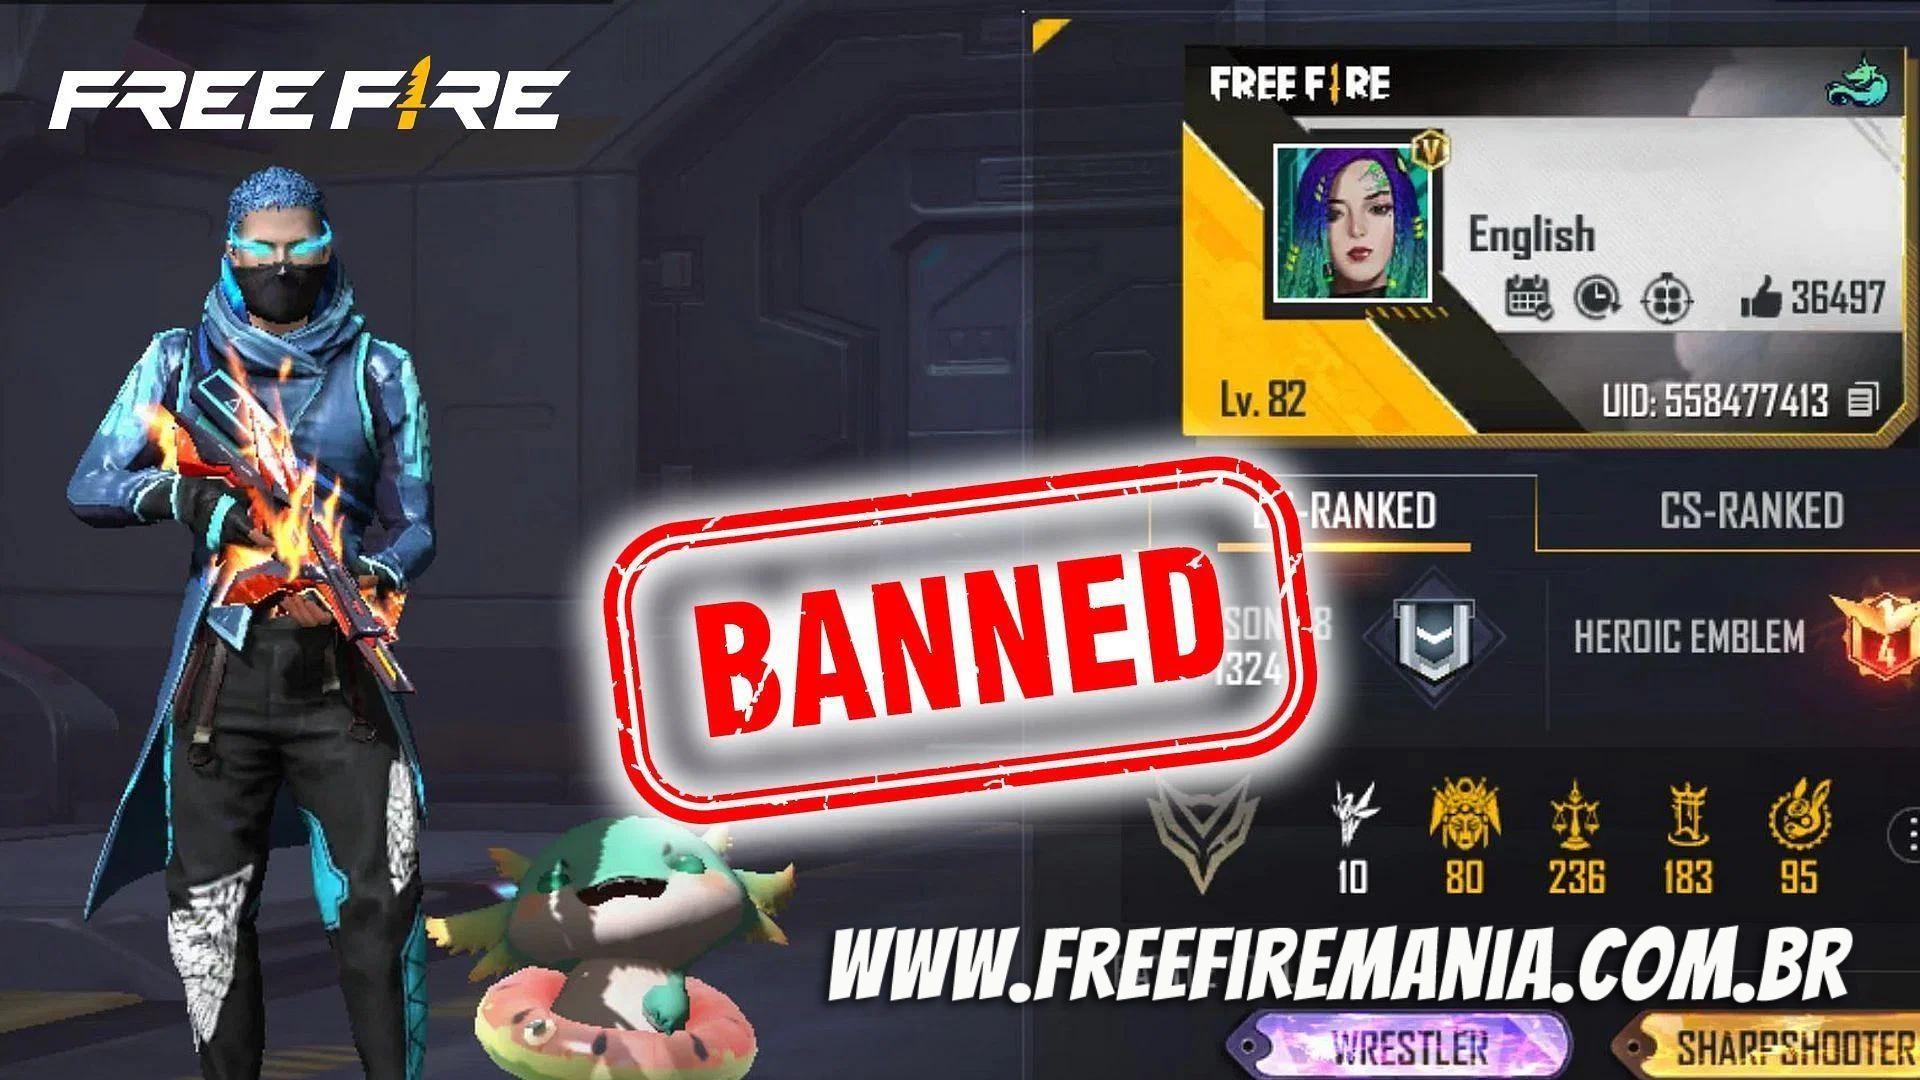 Why Garena bans Free Fire accounts and how players can ask for help